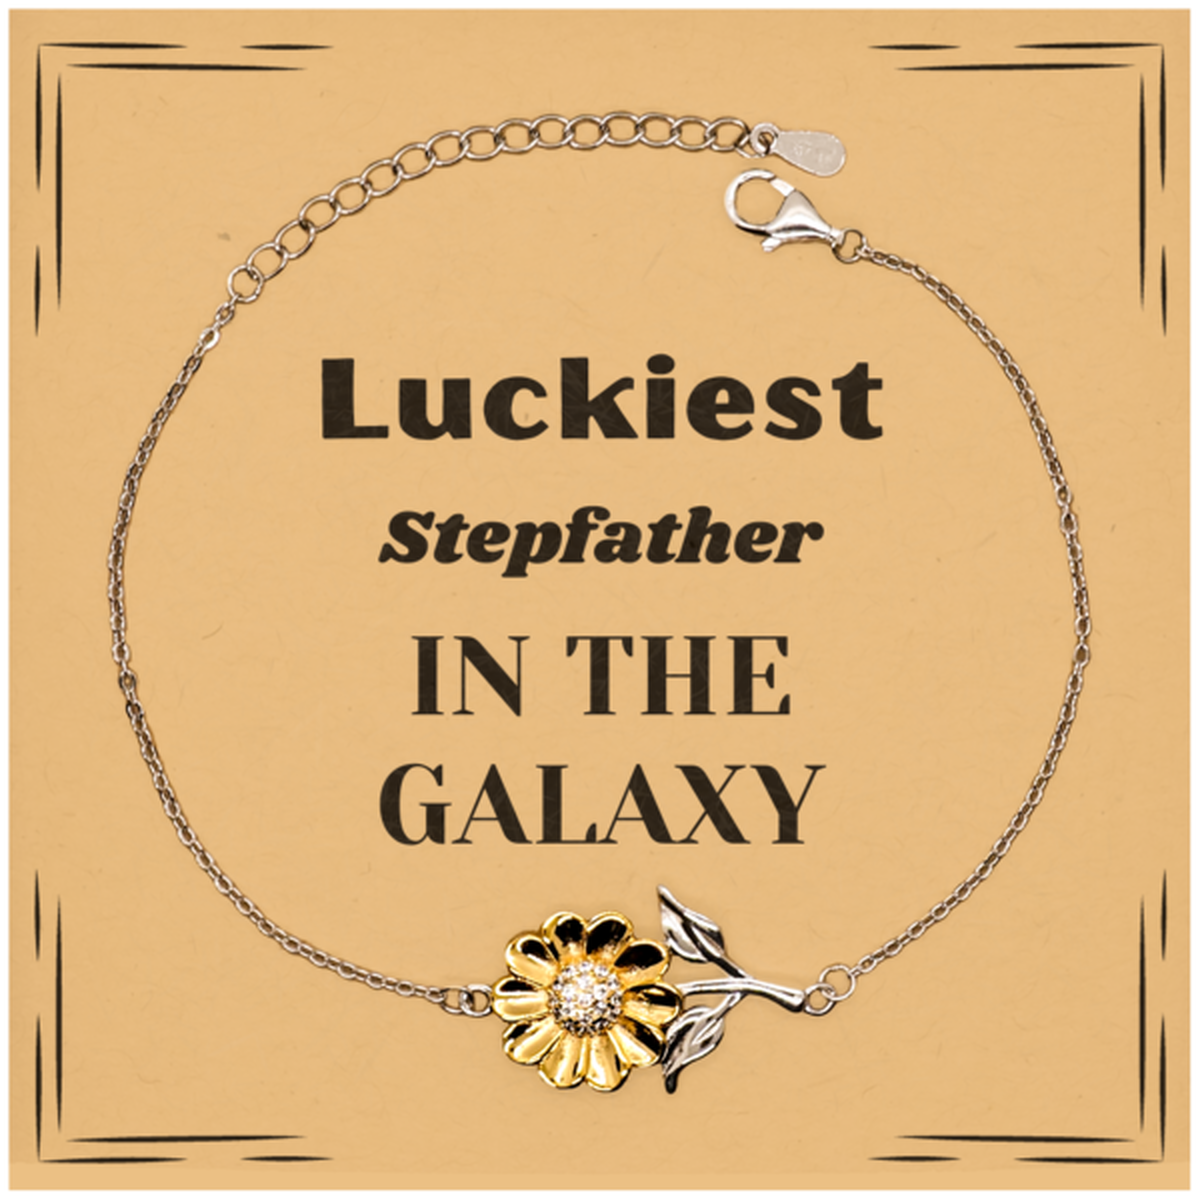 Luckiest Stepfather in the Galaxy, To My Stepfather Message Card Gifts, Christmas Stepfather Sunflower Bracelet Gifts, X-mas Birthday Unique Gifts For Stepfather Men Women